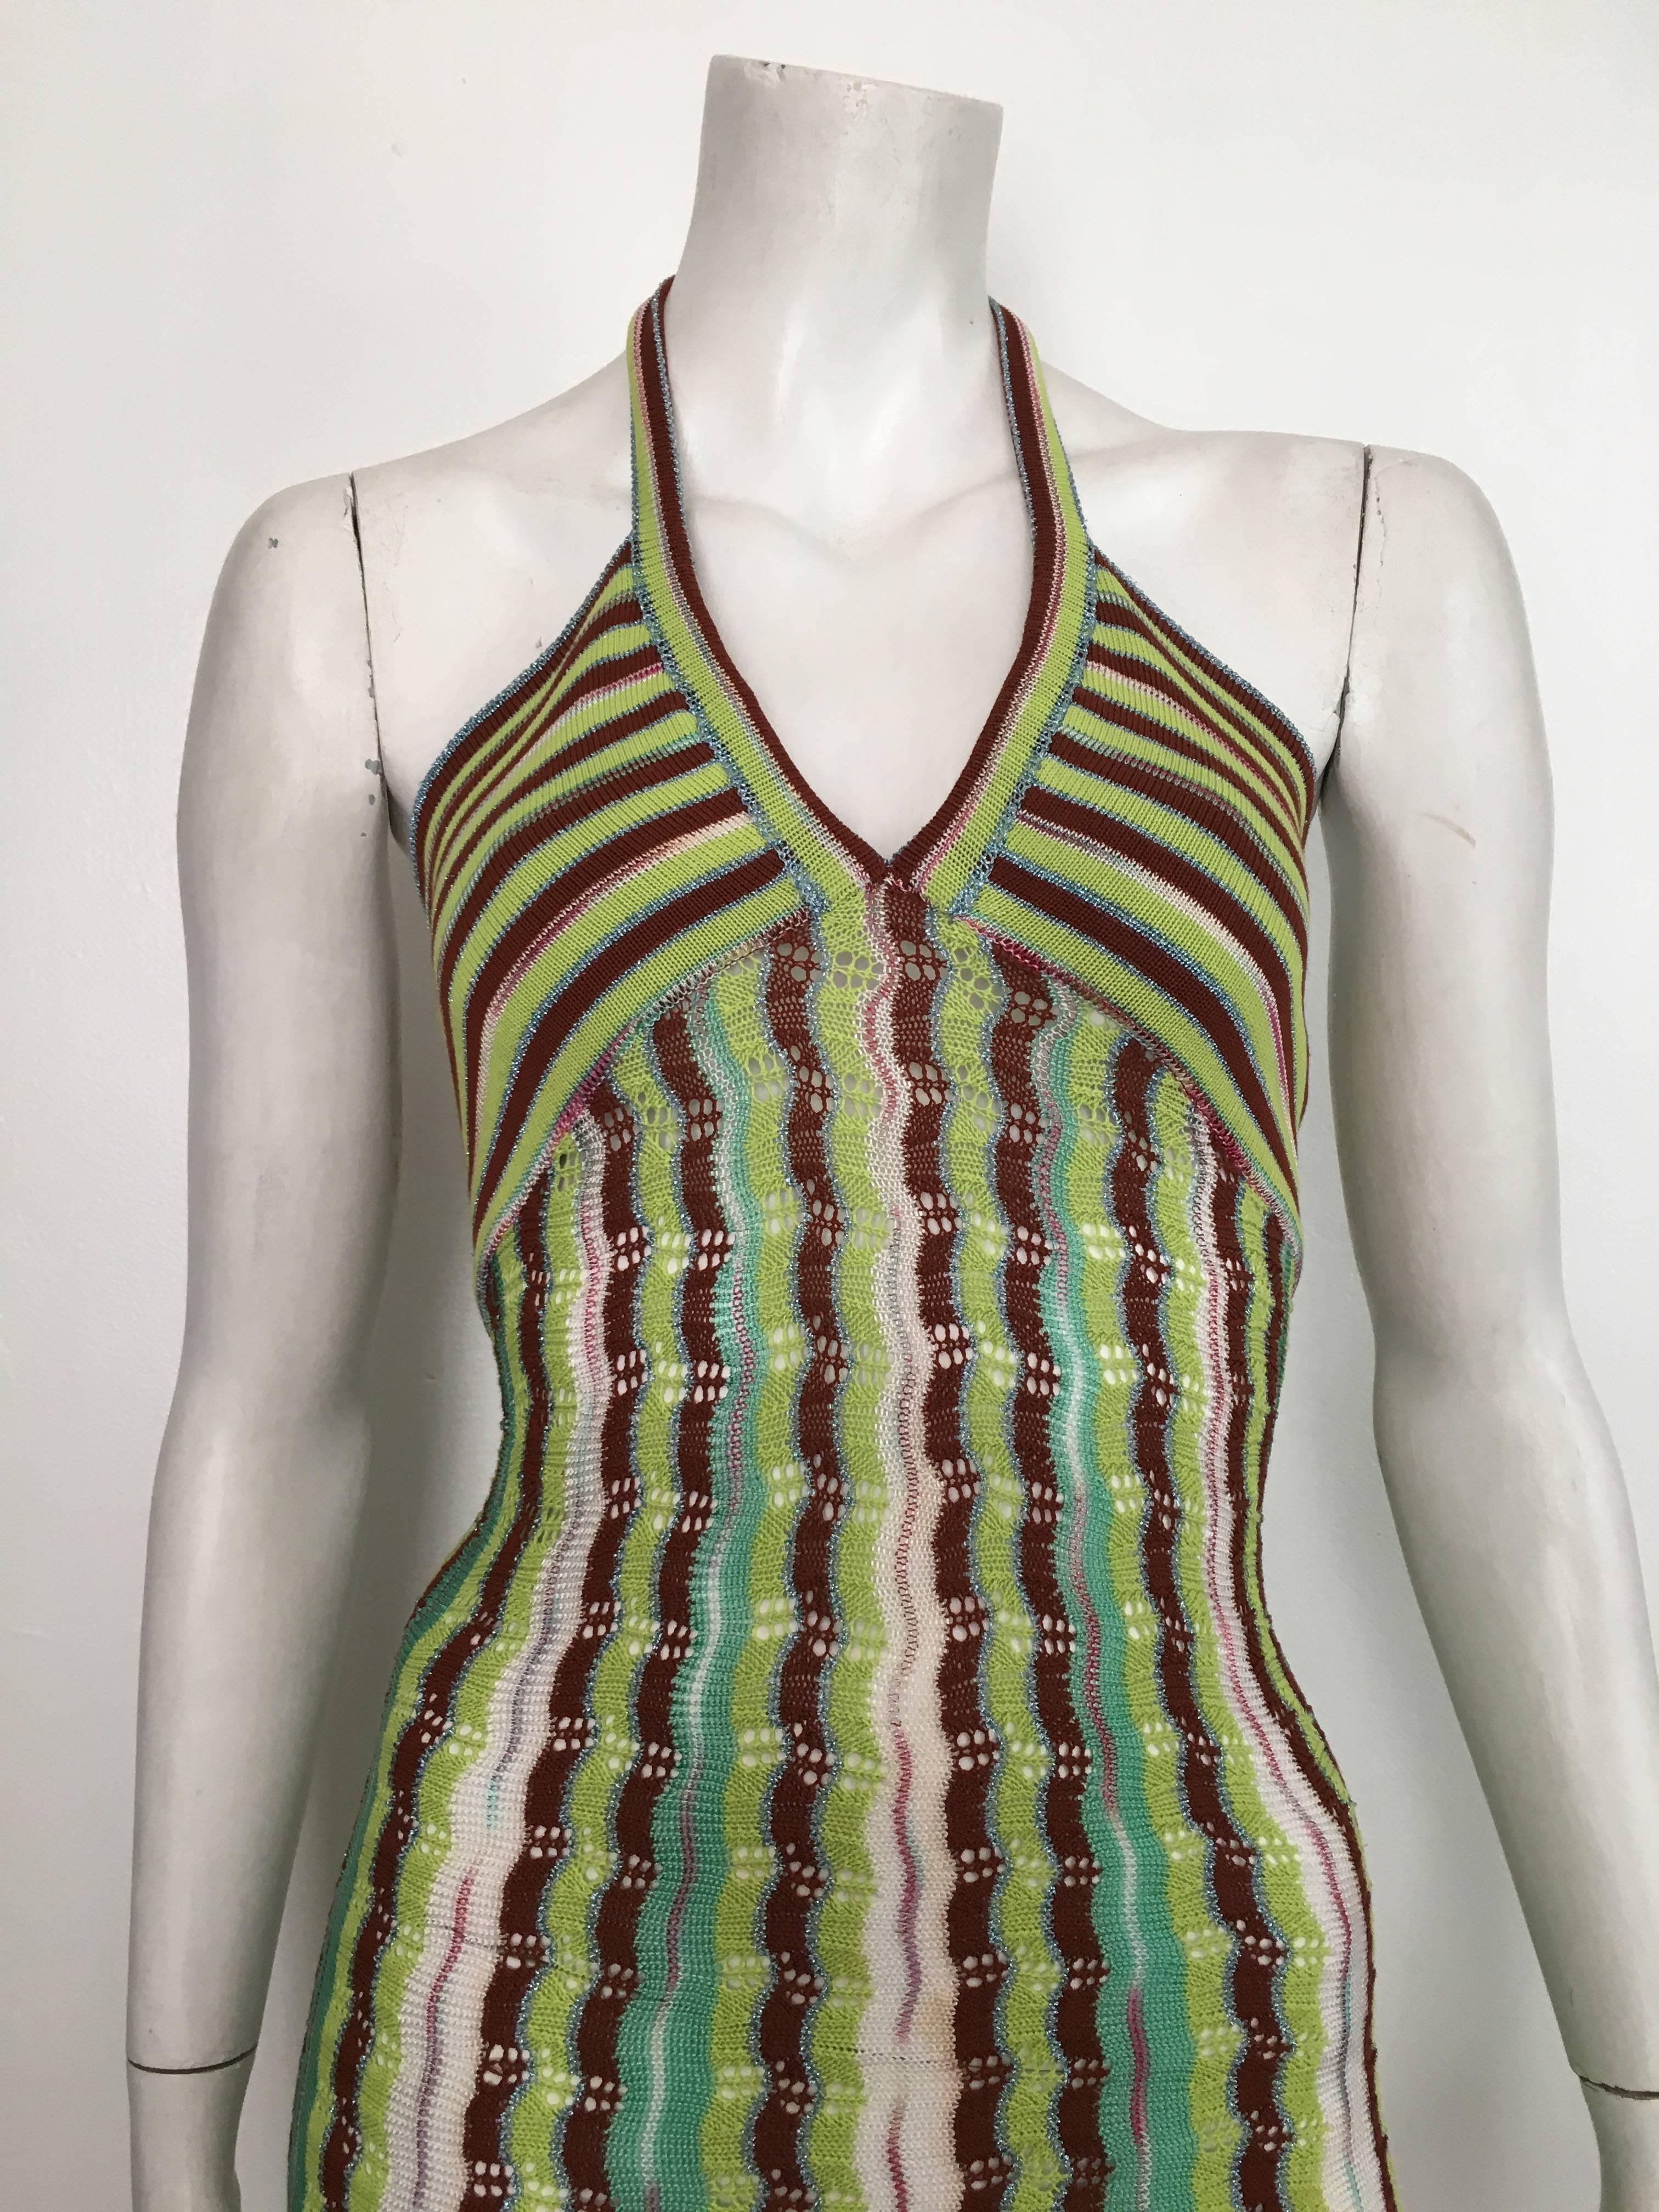 M by Missoni knit halter dress is labeled a size 6 but fits like a size 4.  Matilda the Mannequin is a size 4 and this fits Matilda perfectly.  Ladies please use the measurements I provide so you can use your tape measure to accurately measure your